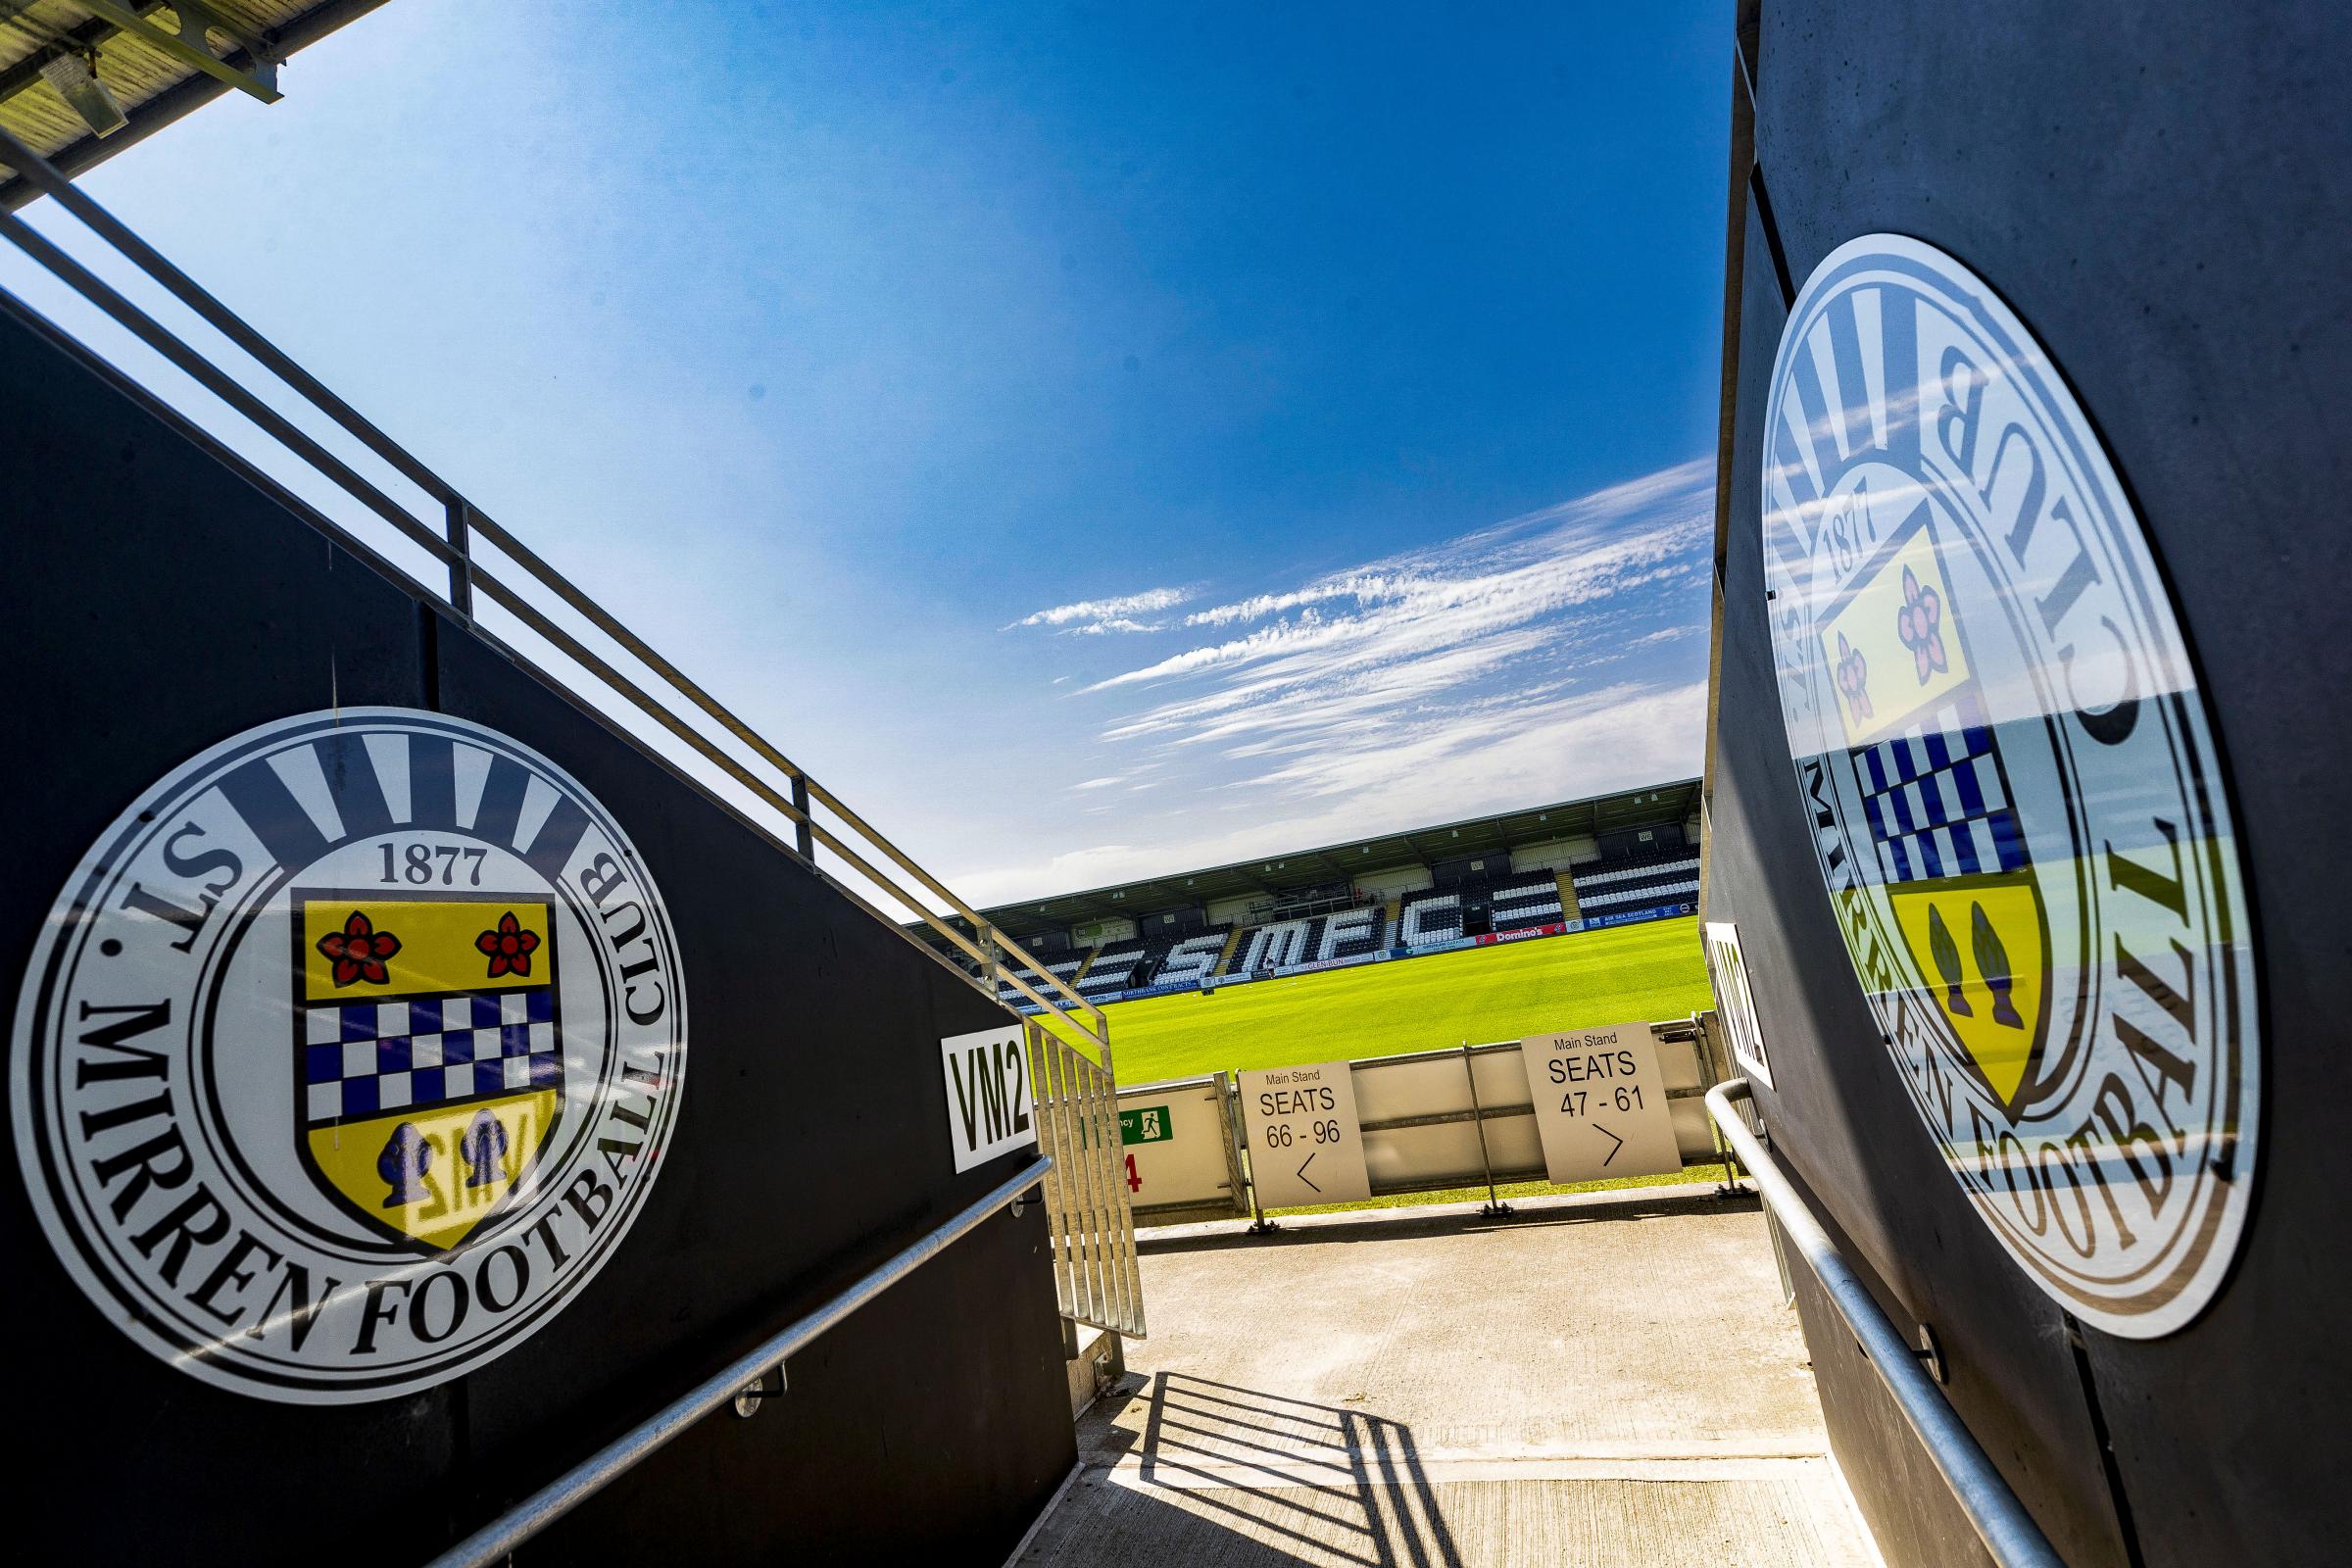 St Mirren plan a minute’s applause in memory of the Queen ahead of Celtic match